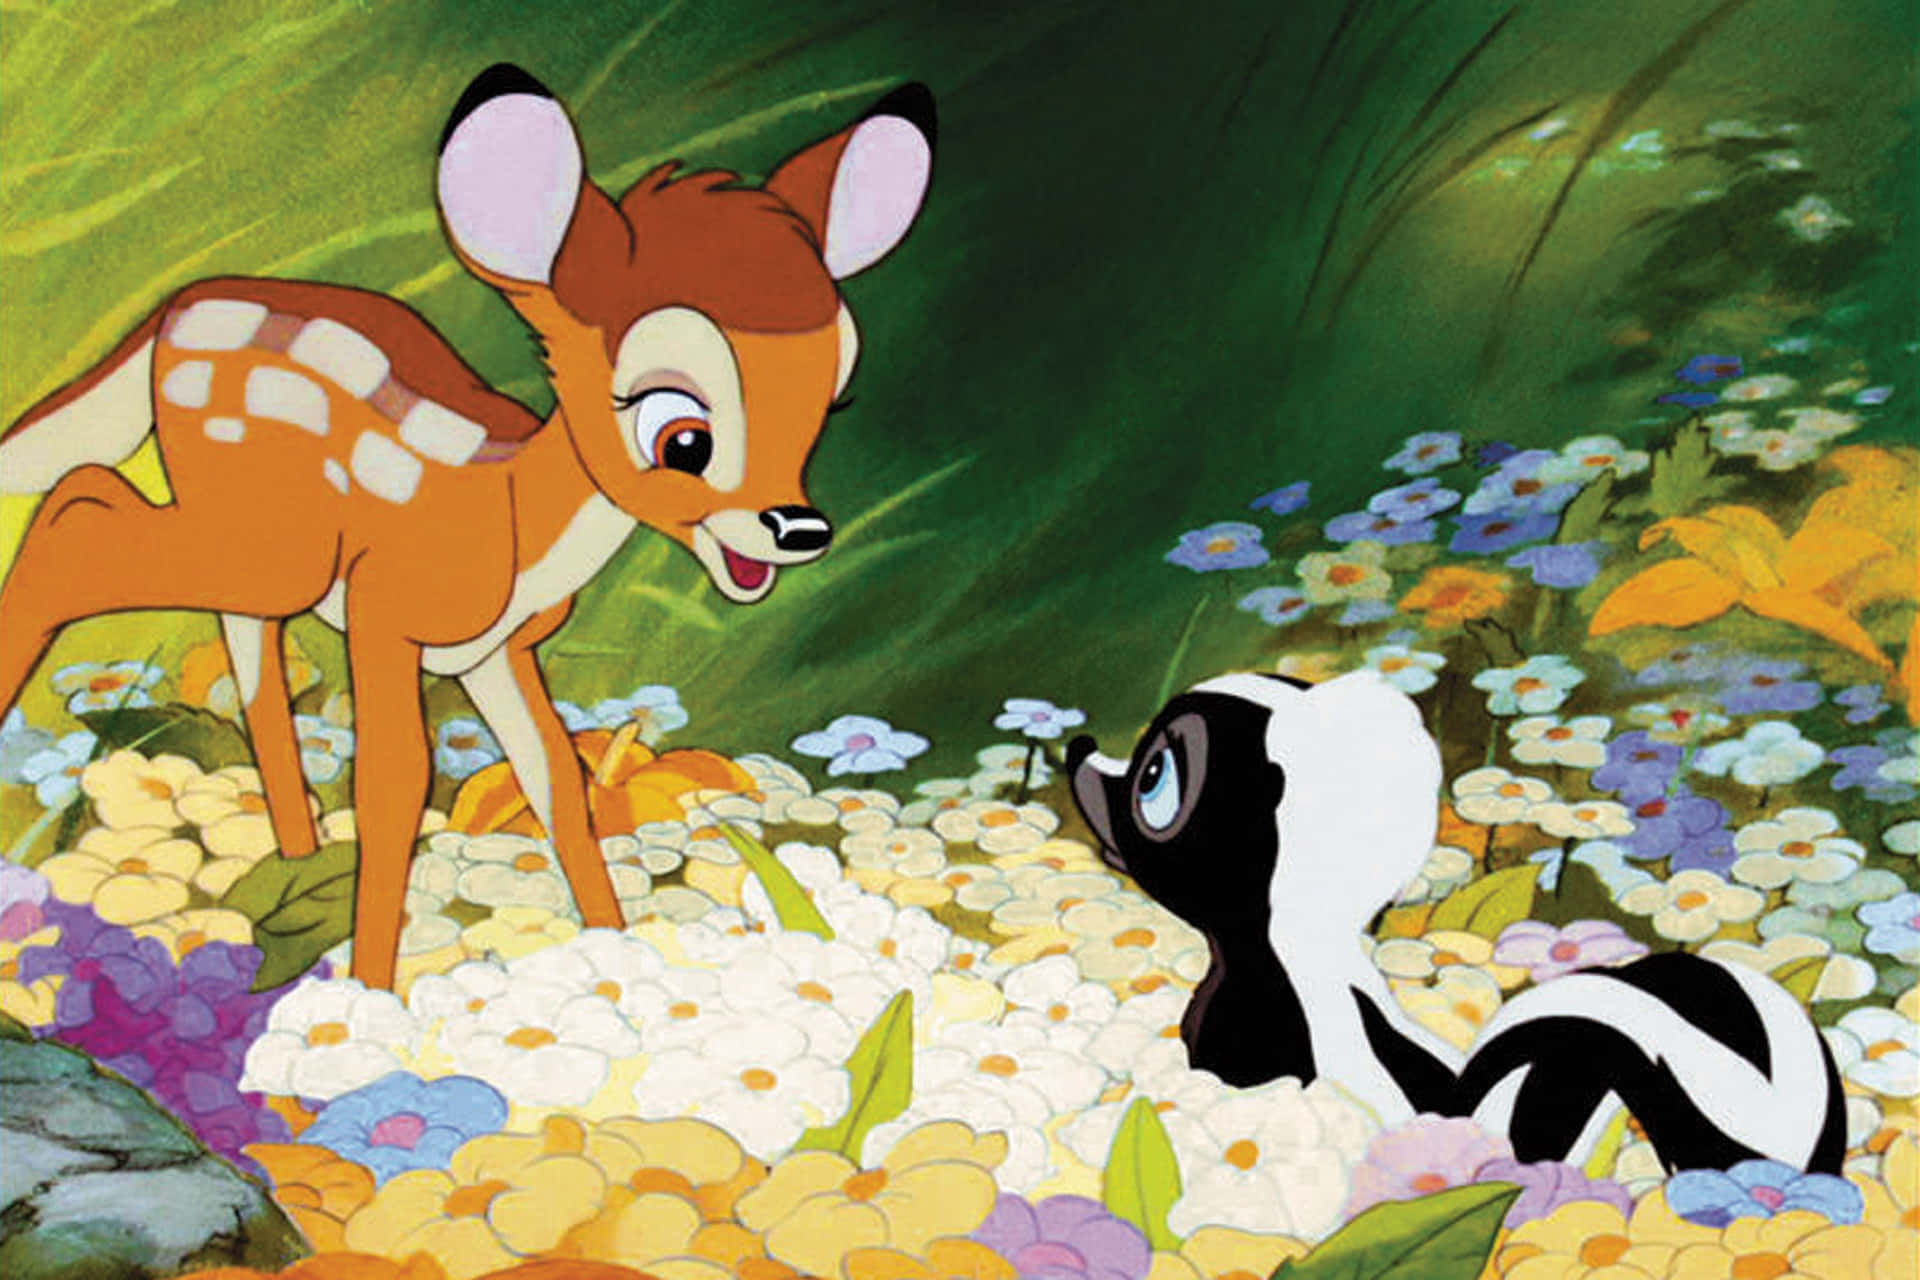 Celebrate the Magic of Friendship with Bambi